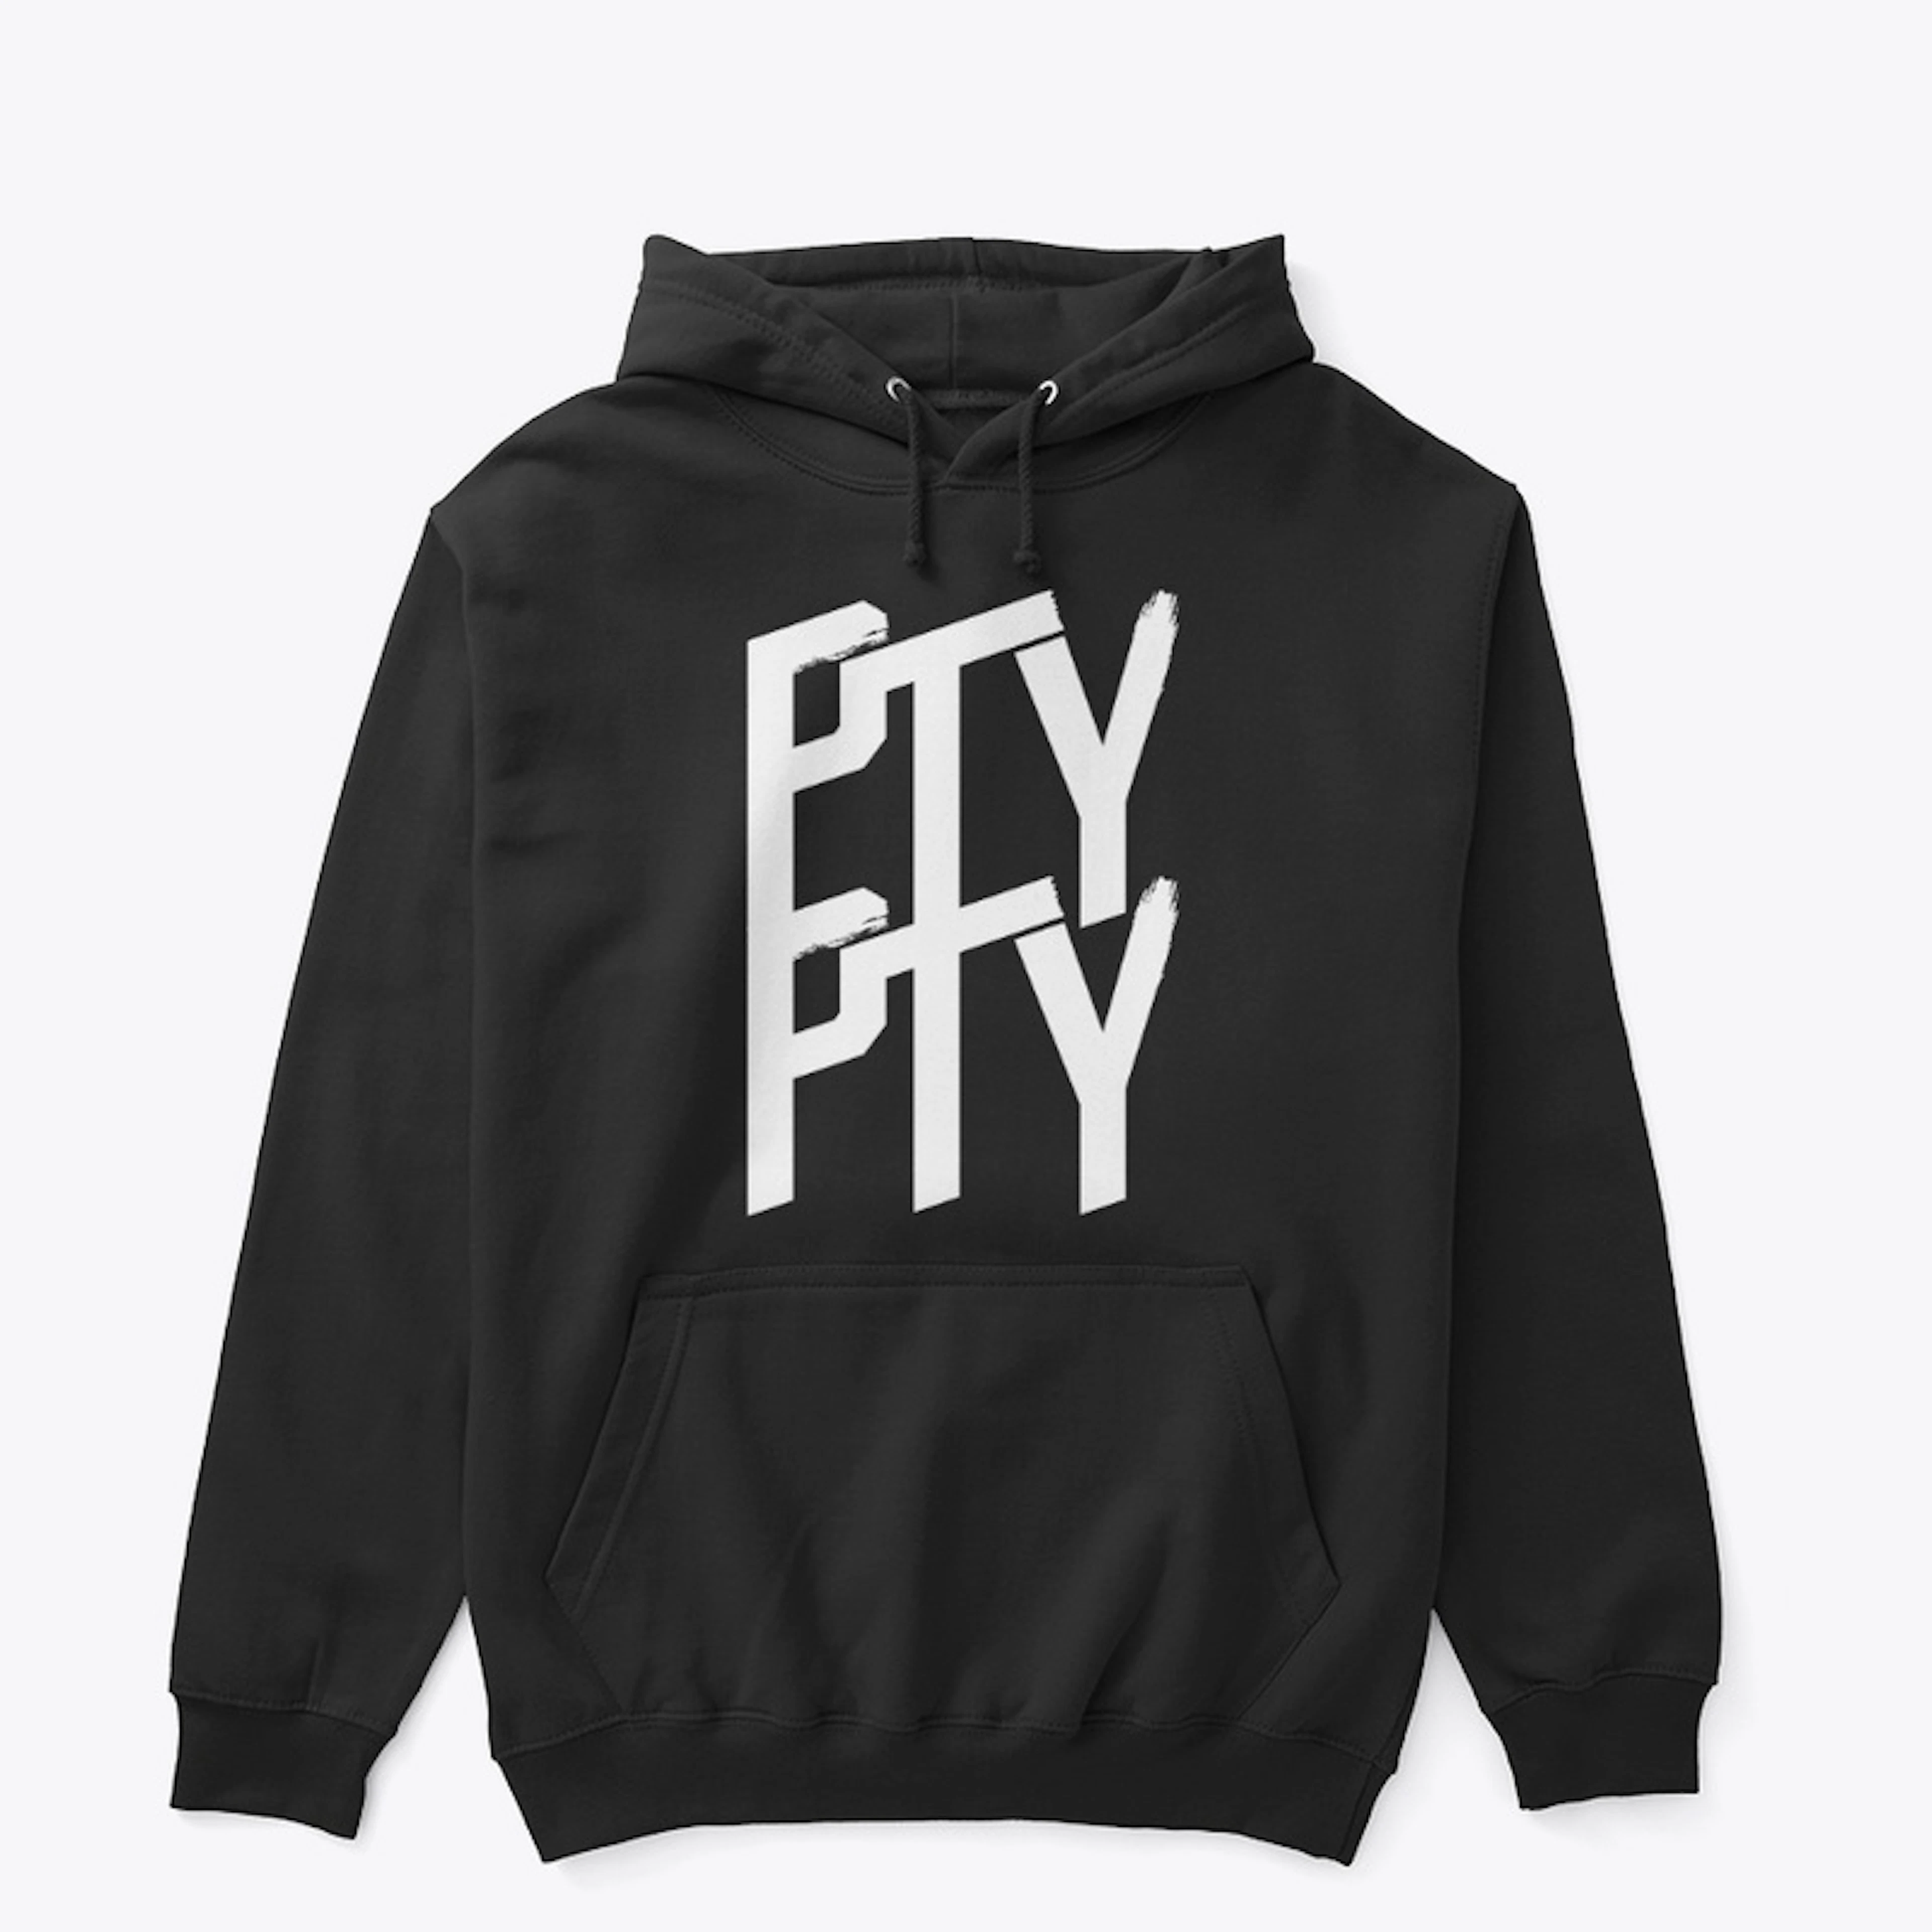 PTY B&W Pullover Hoodie